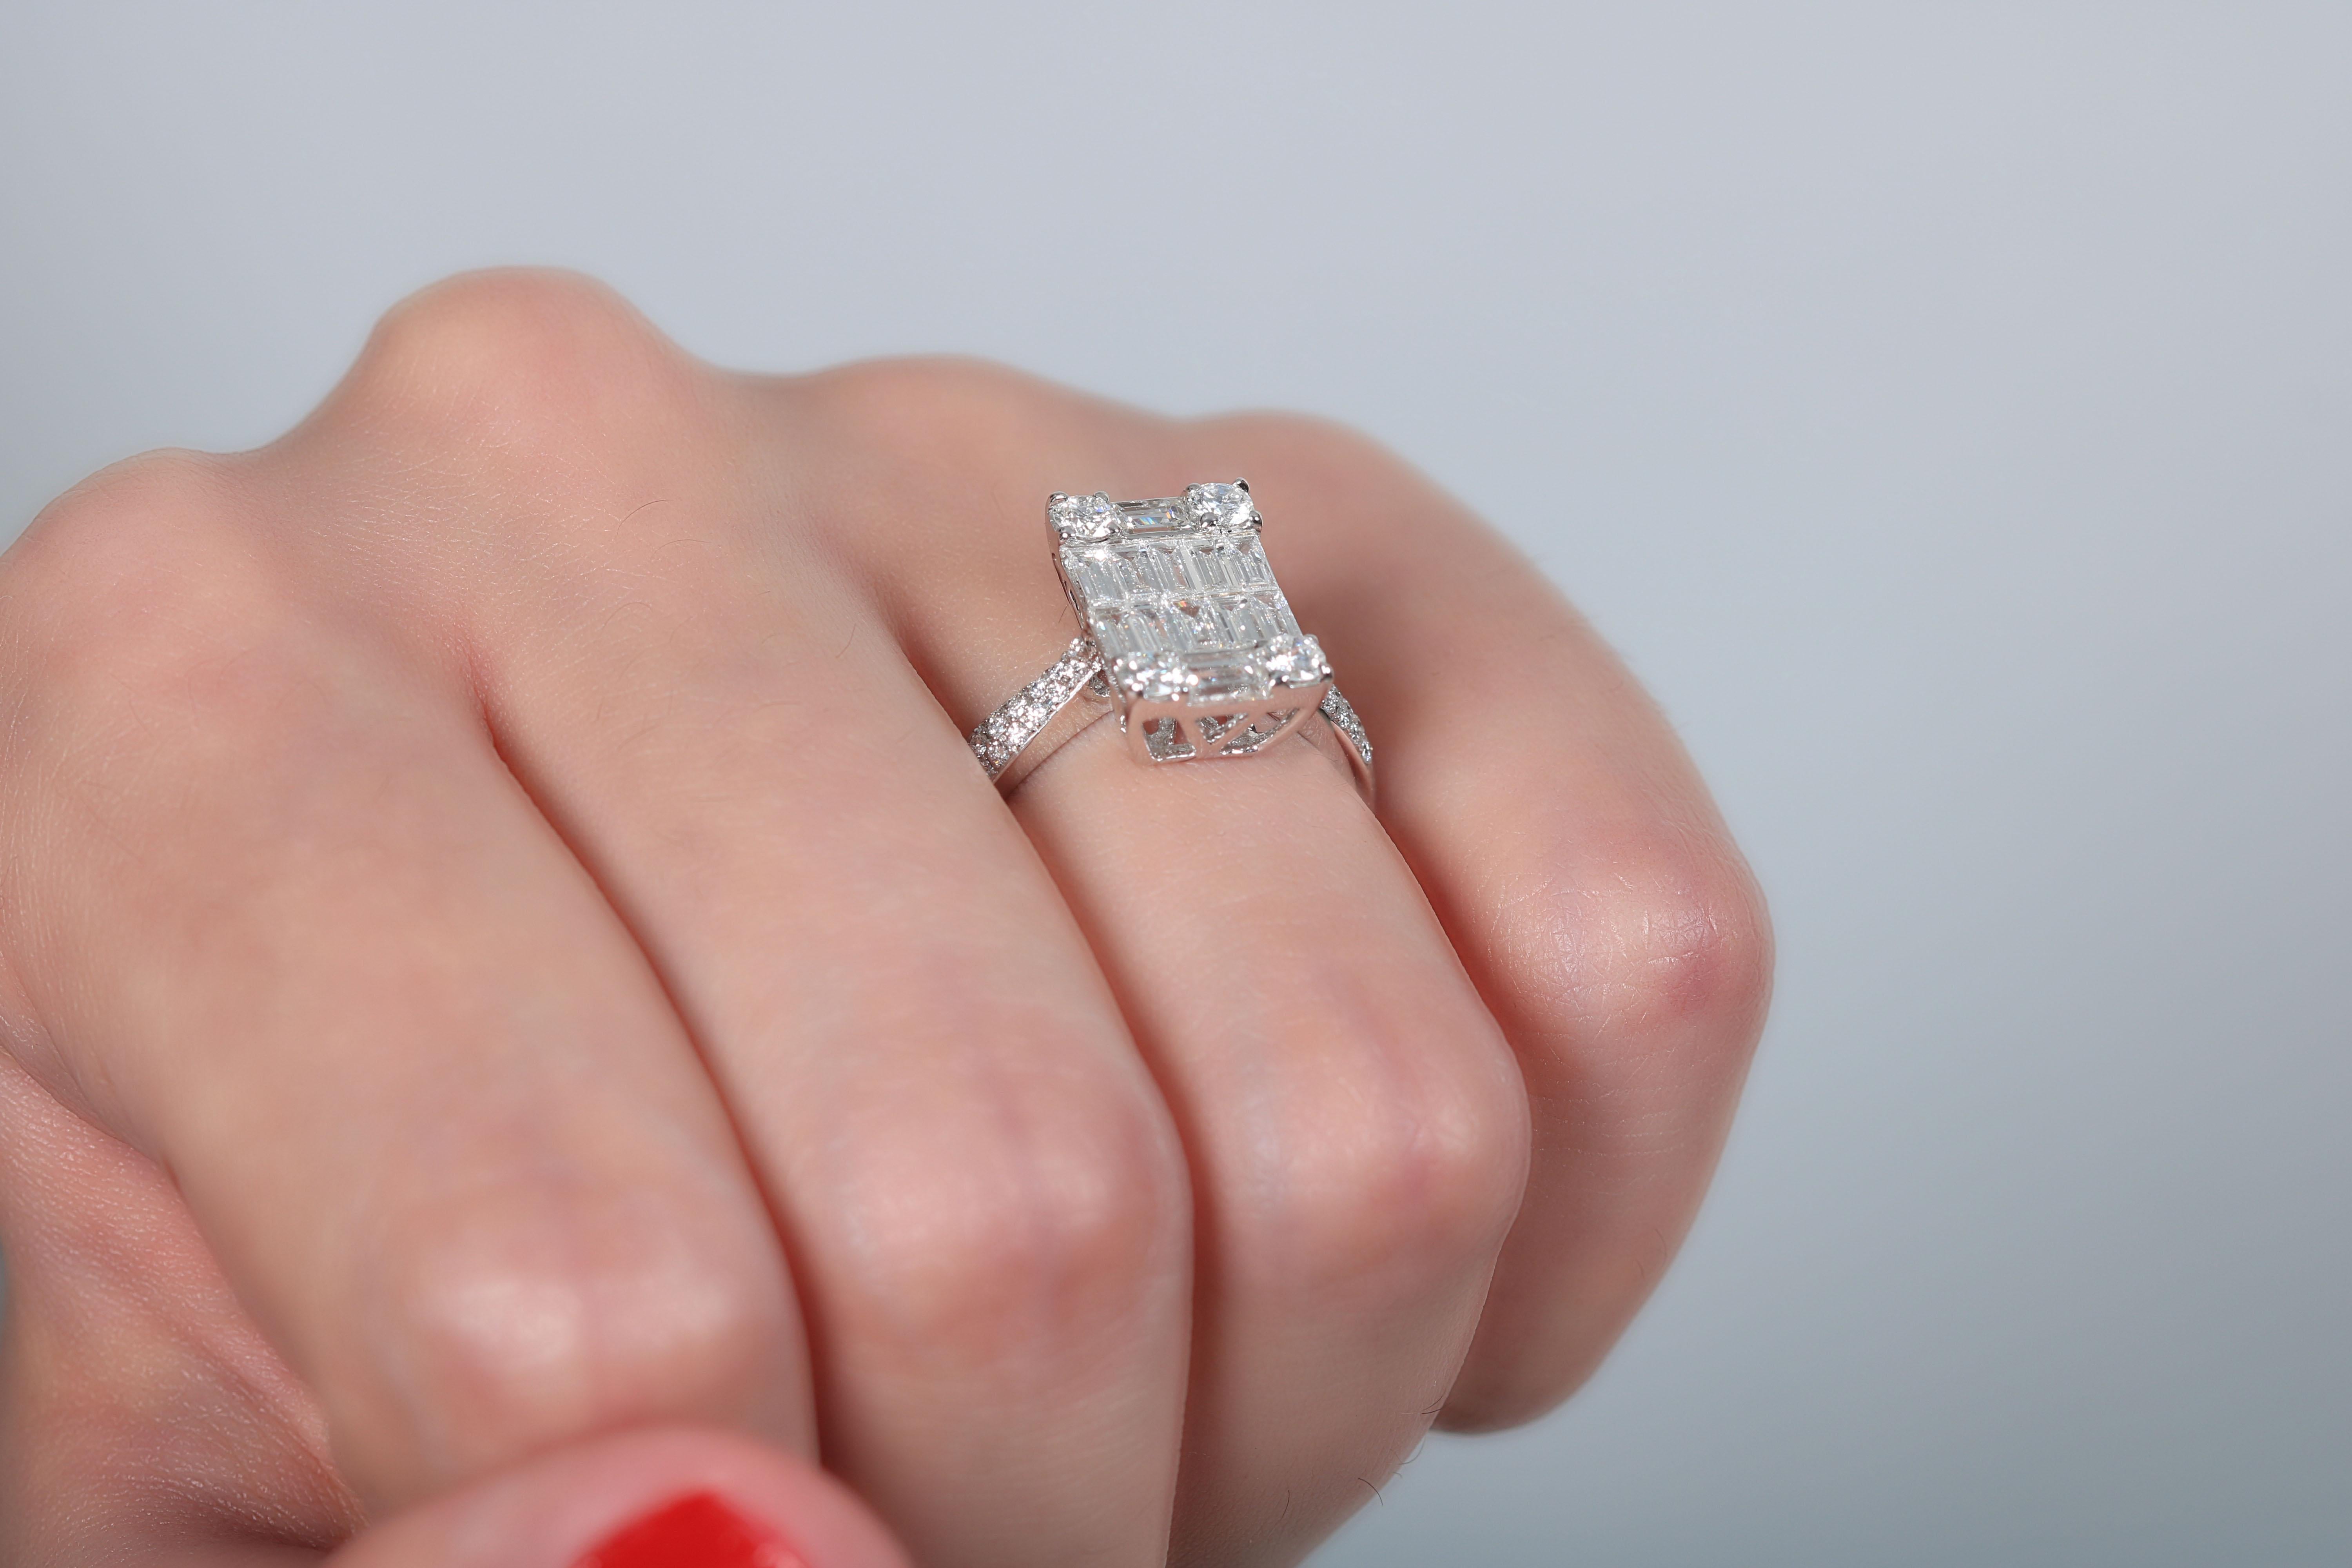 Exquisite decorative detailing makes this significant white gold 18 K ring with baguette and 4 round shape diamonds on the corners plus small micropave round diamonds on the side, a true standout. Complements well for the classiest occasions as well